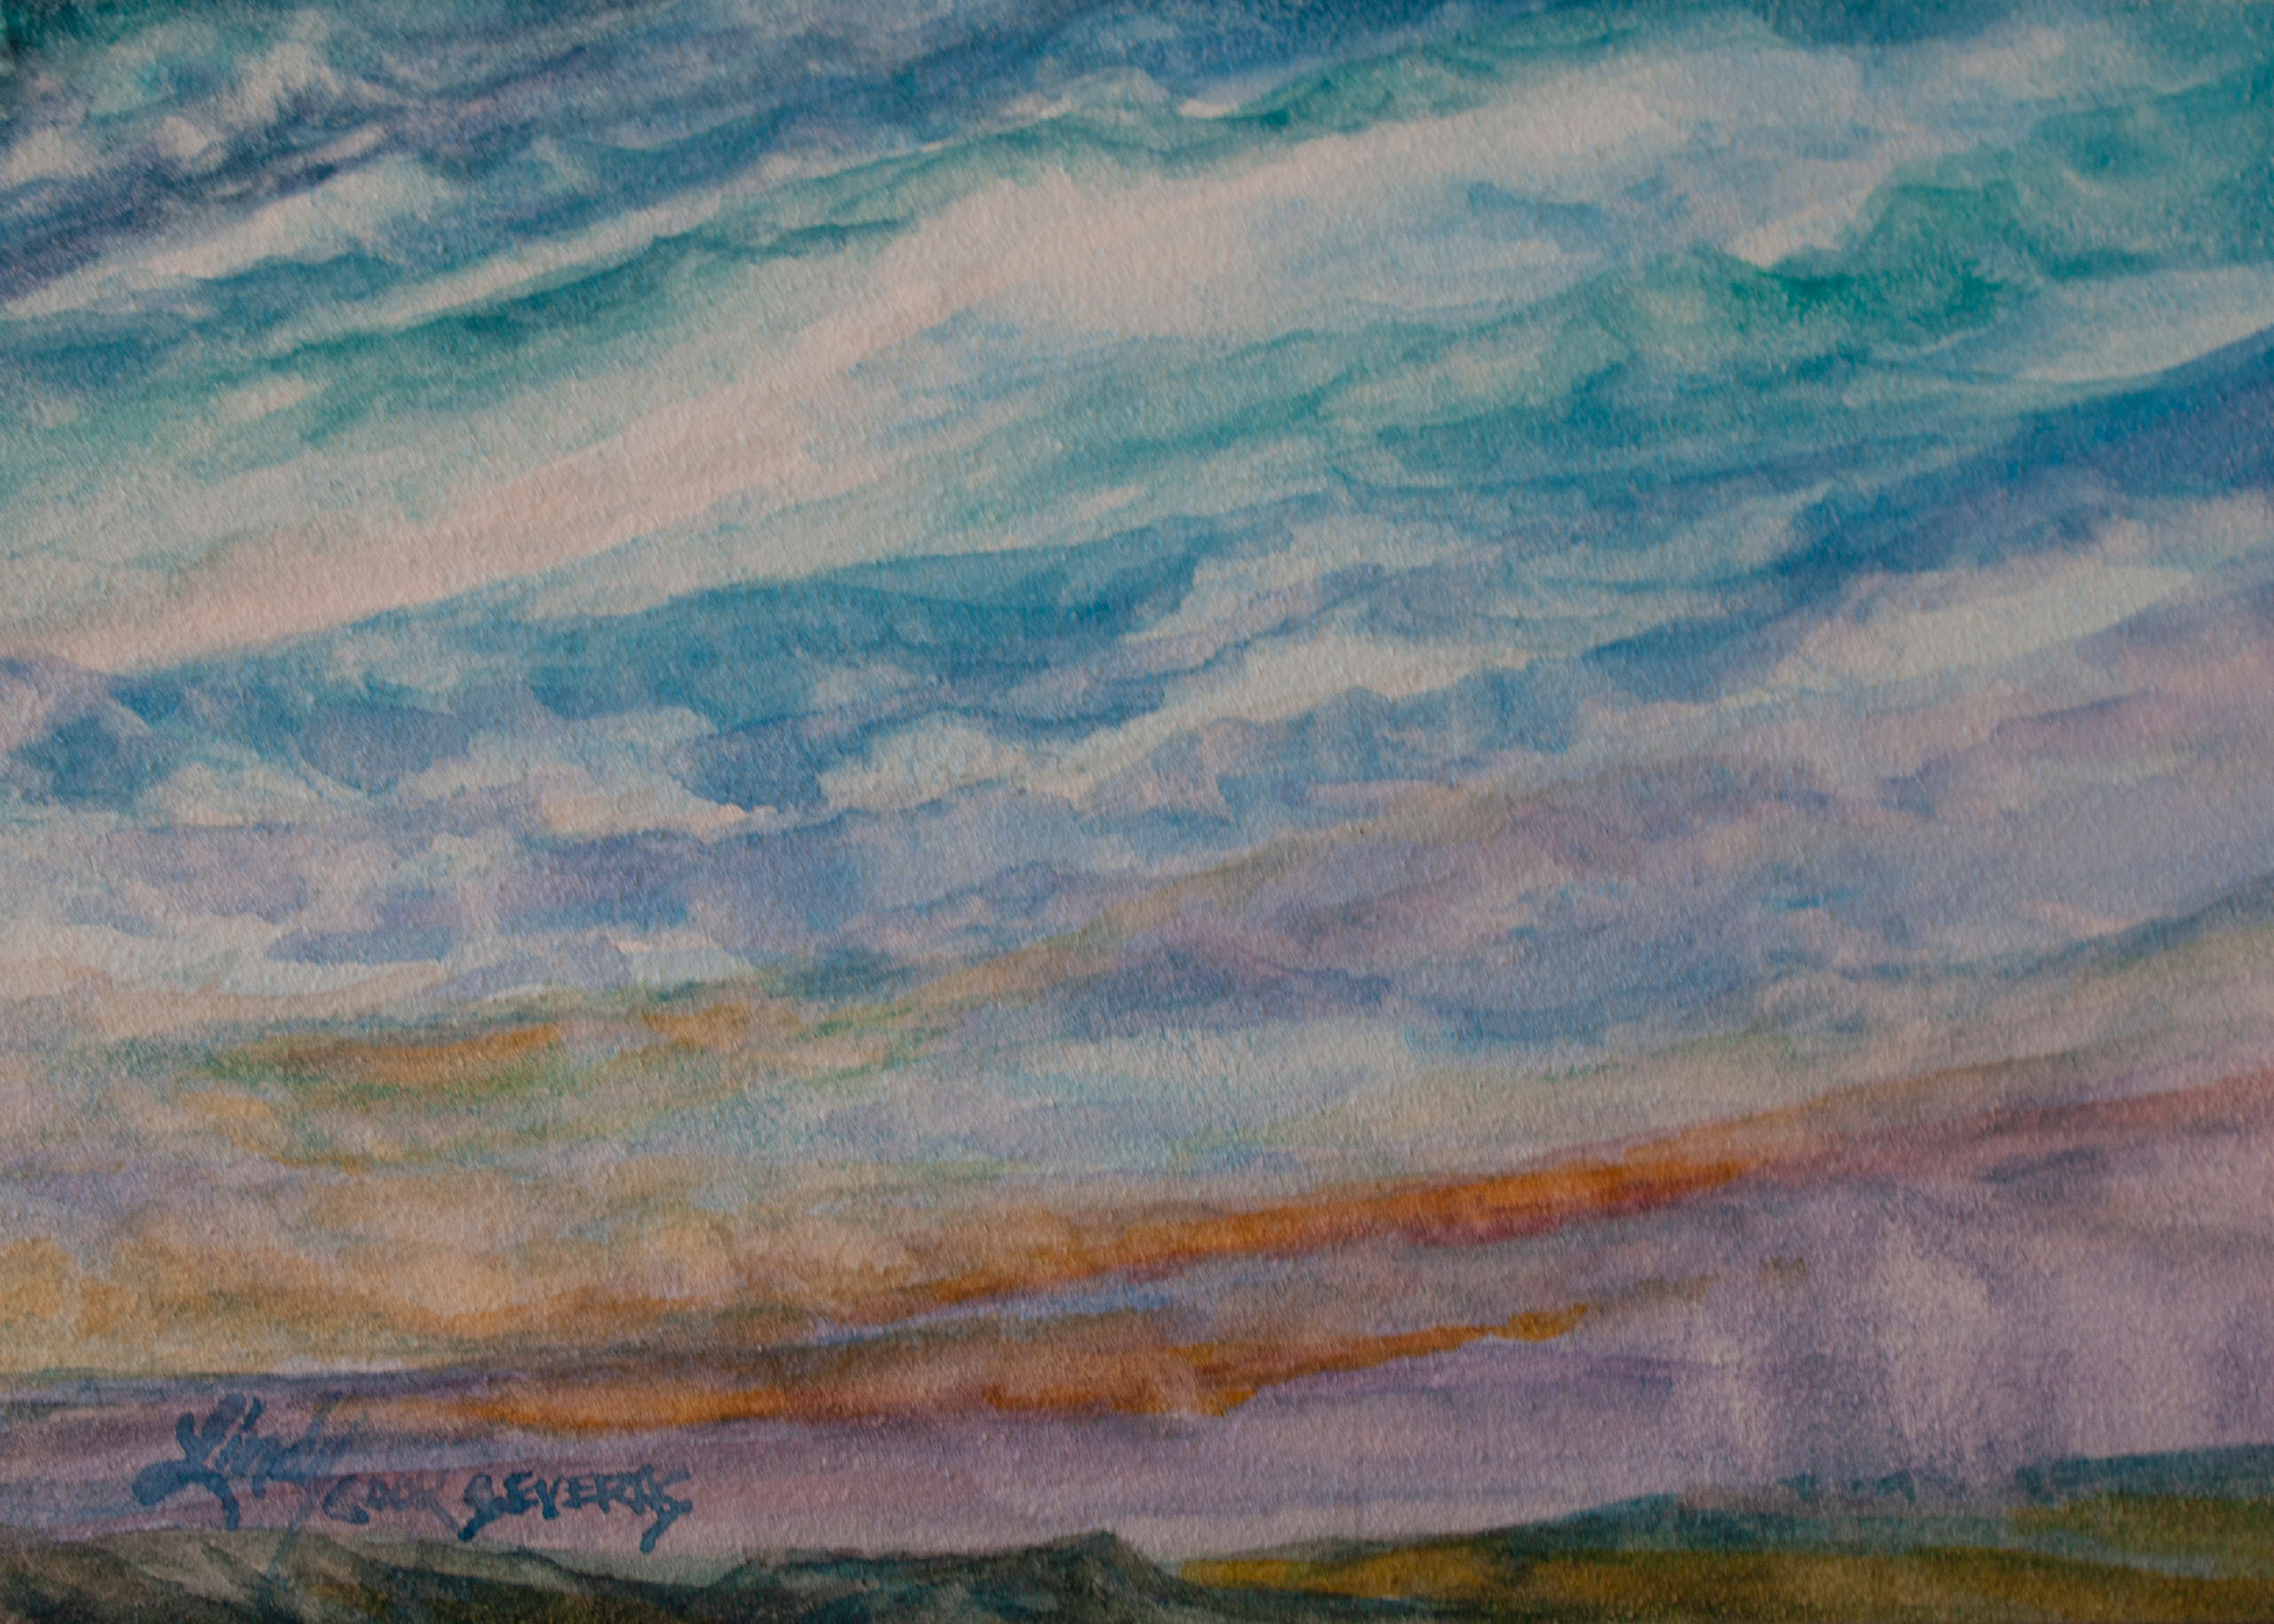 3121 rainy day in west texas 5x7 watercolor lindy c severns rzaymh